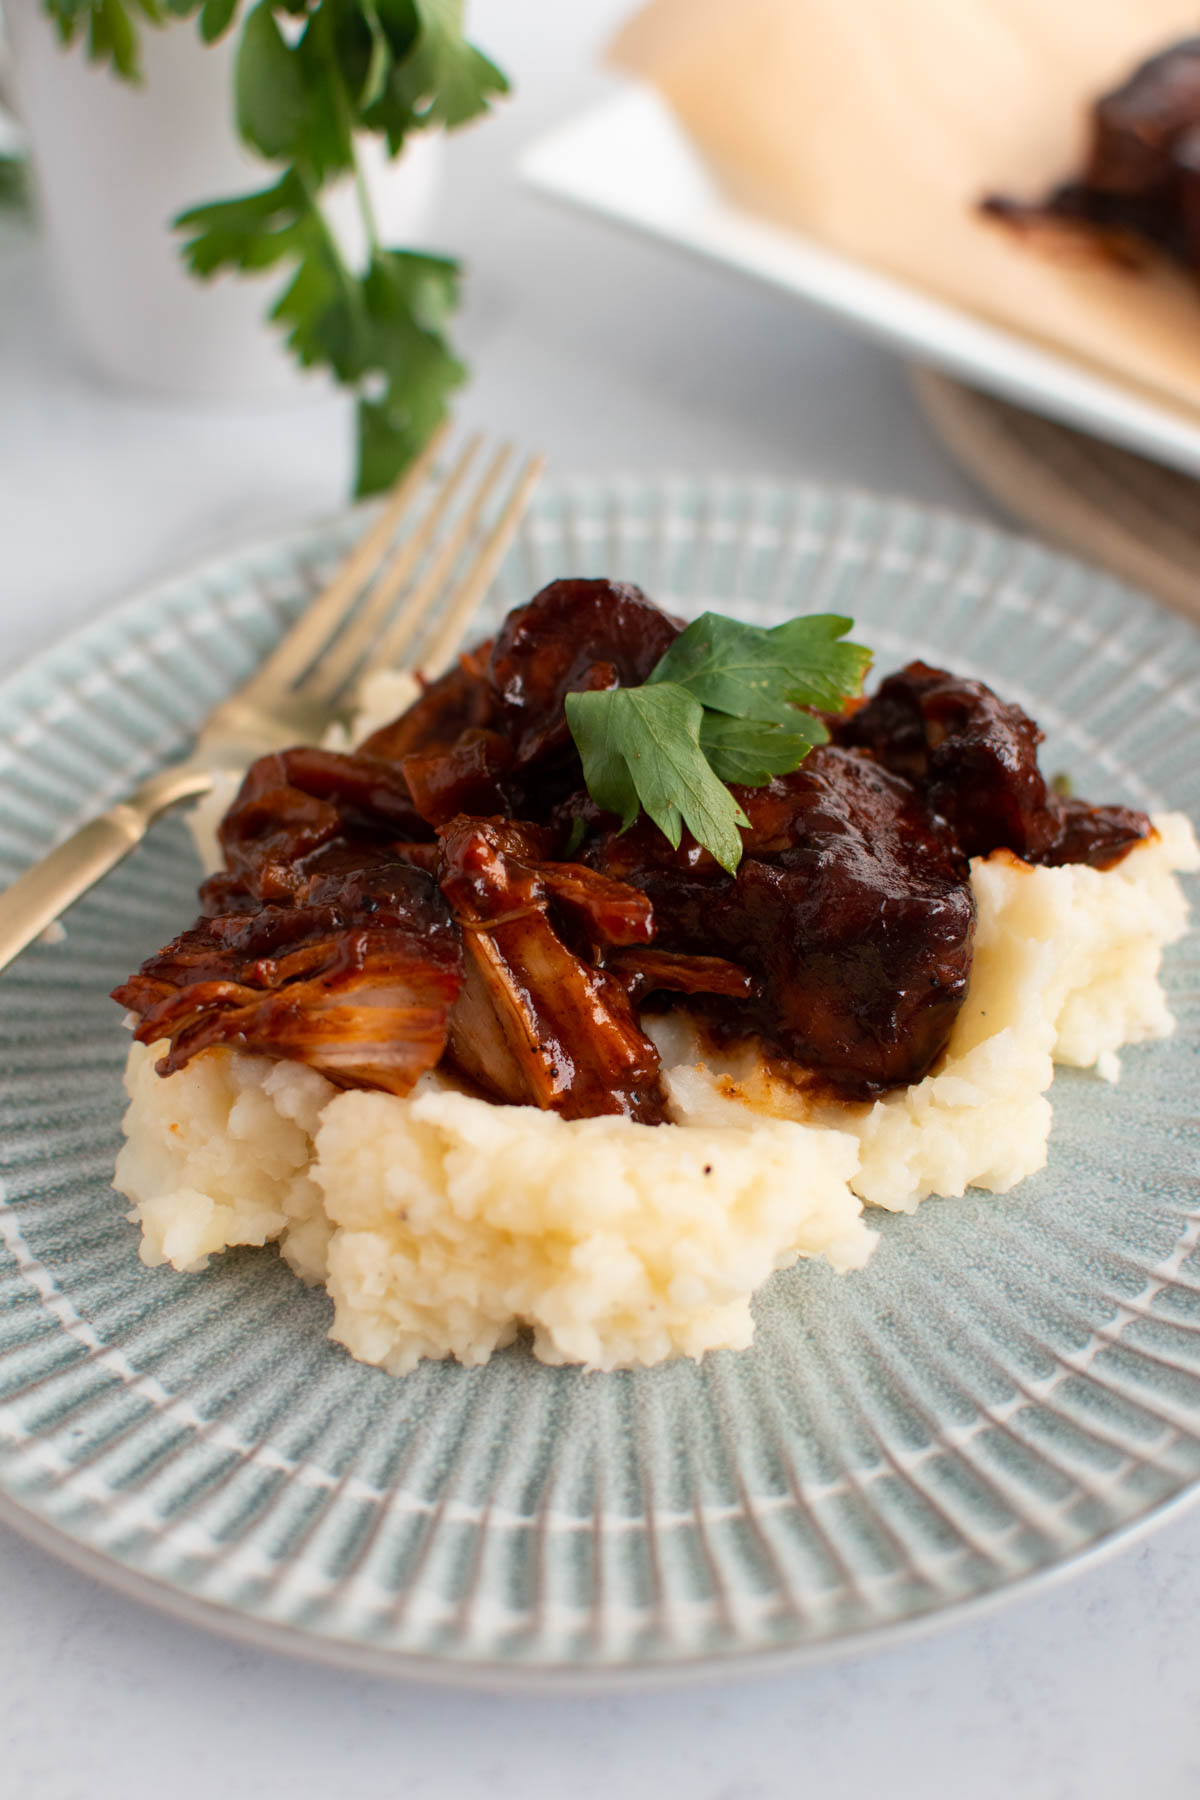 Crock Pot pork ribs with barbeque sauce and mashed potatoes on blue plate.